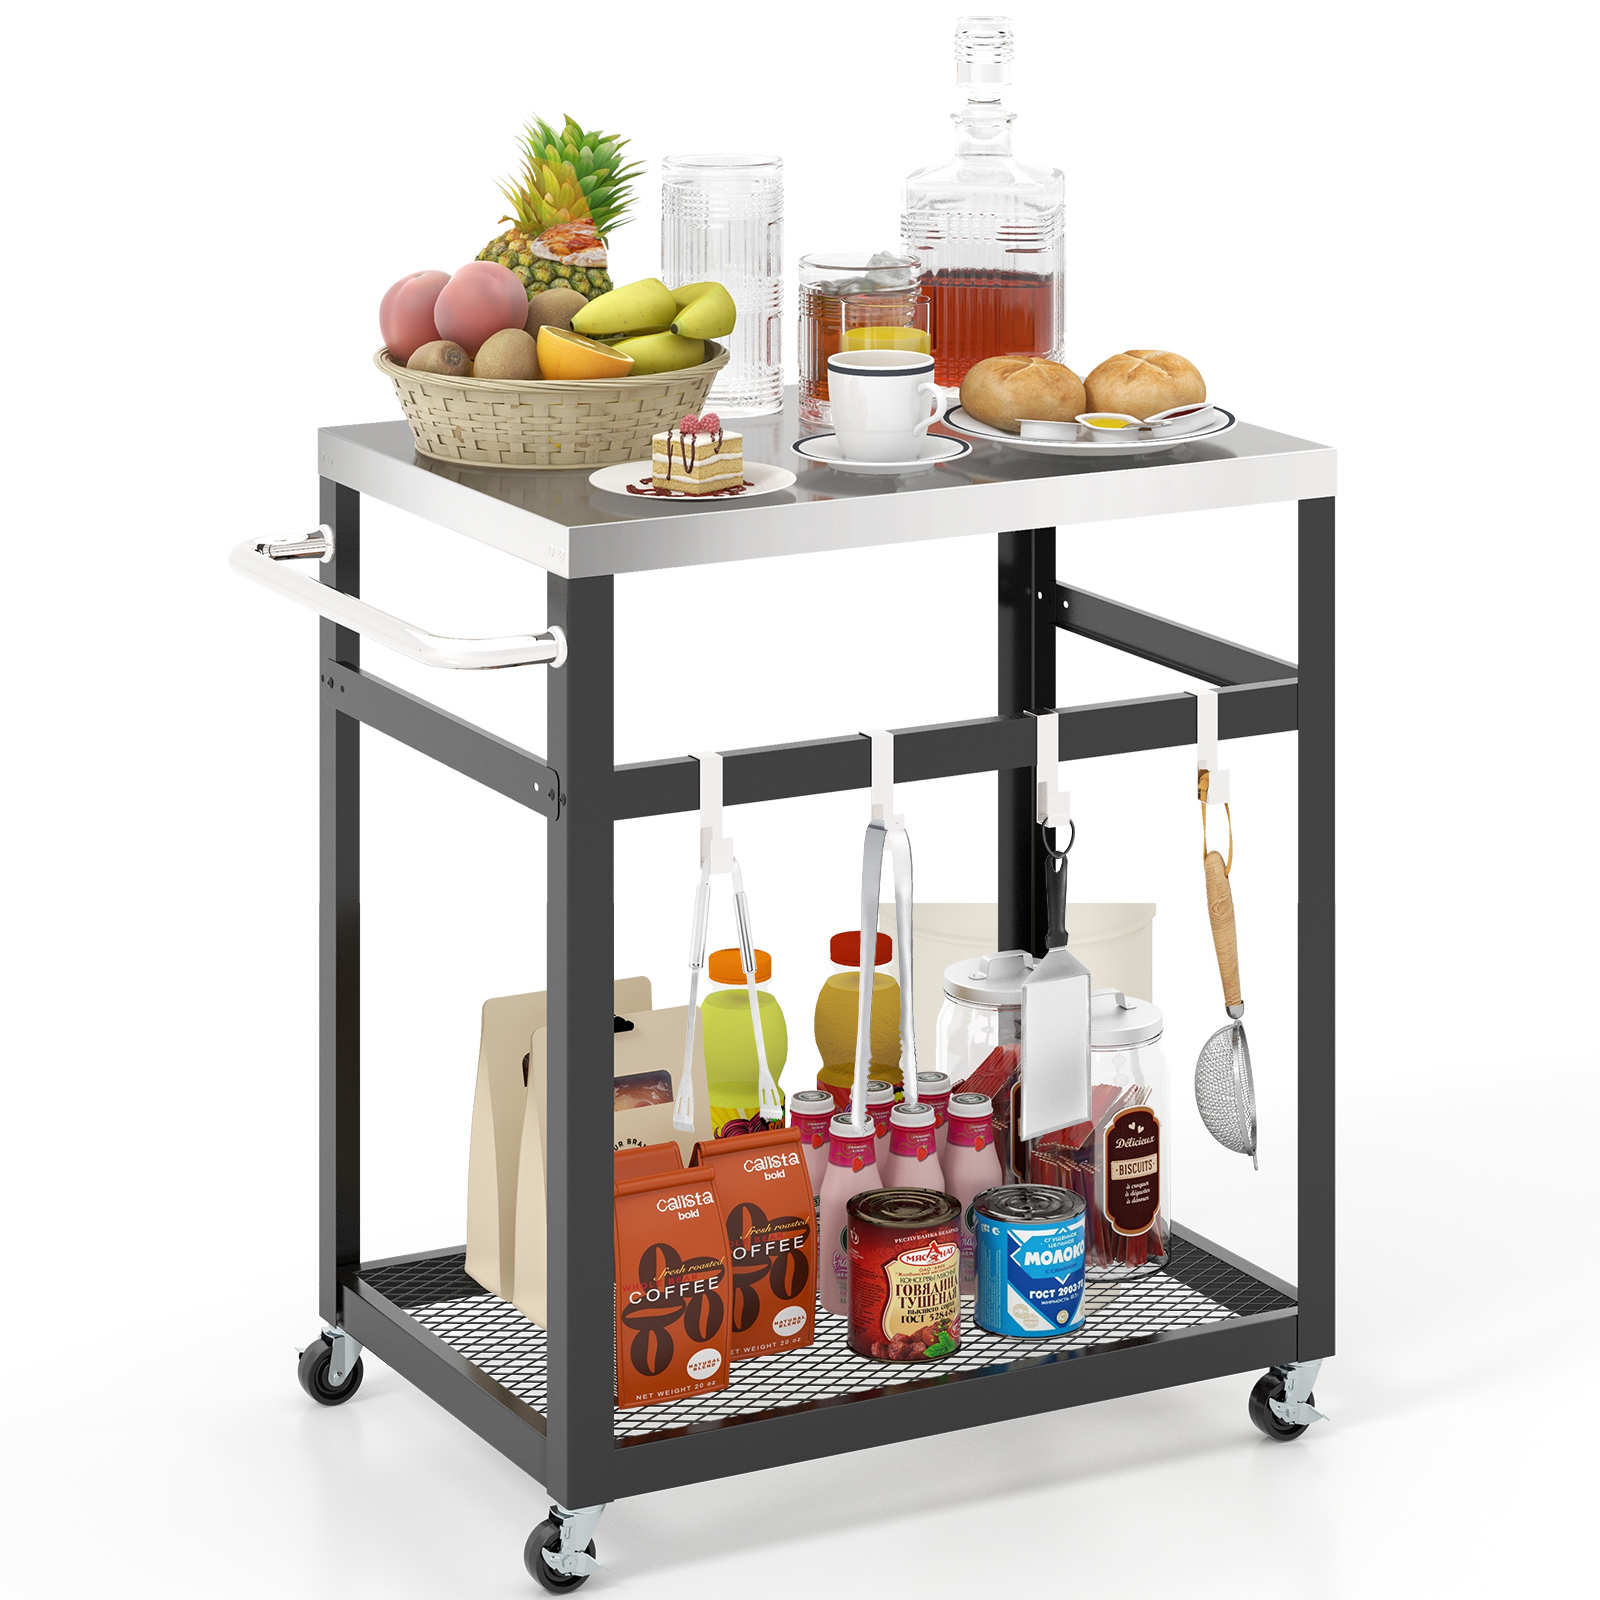 2-tier Stainless Steel Grill Cart with Wheels and Handle-Black